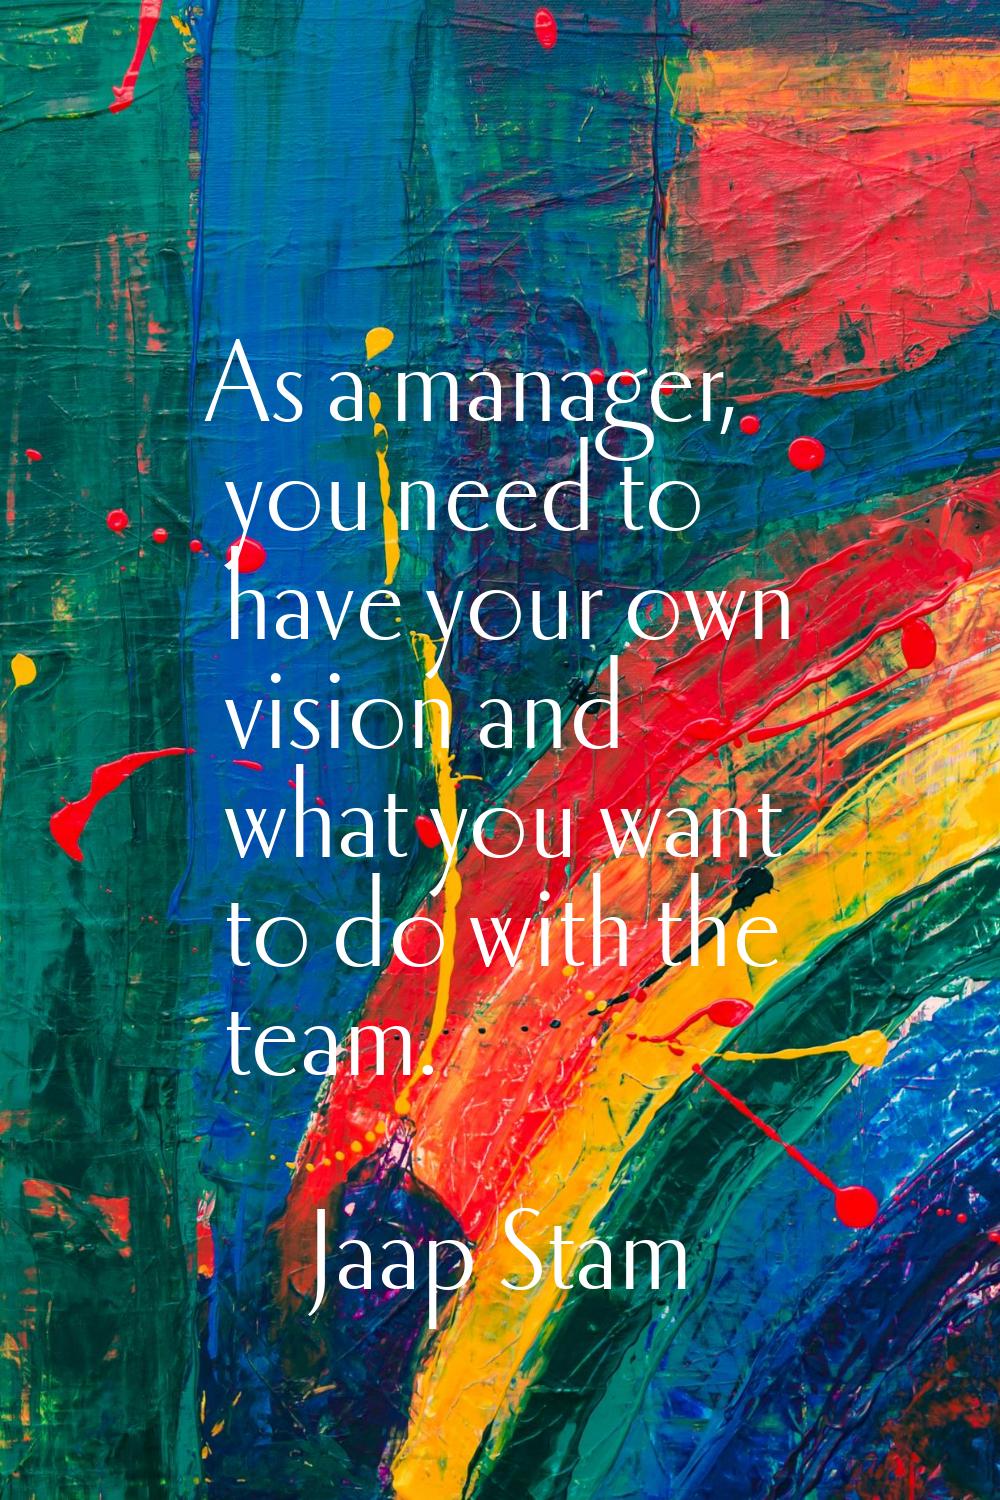 As a manager, you need to have your own vision and what you want to do with the team.